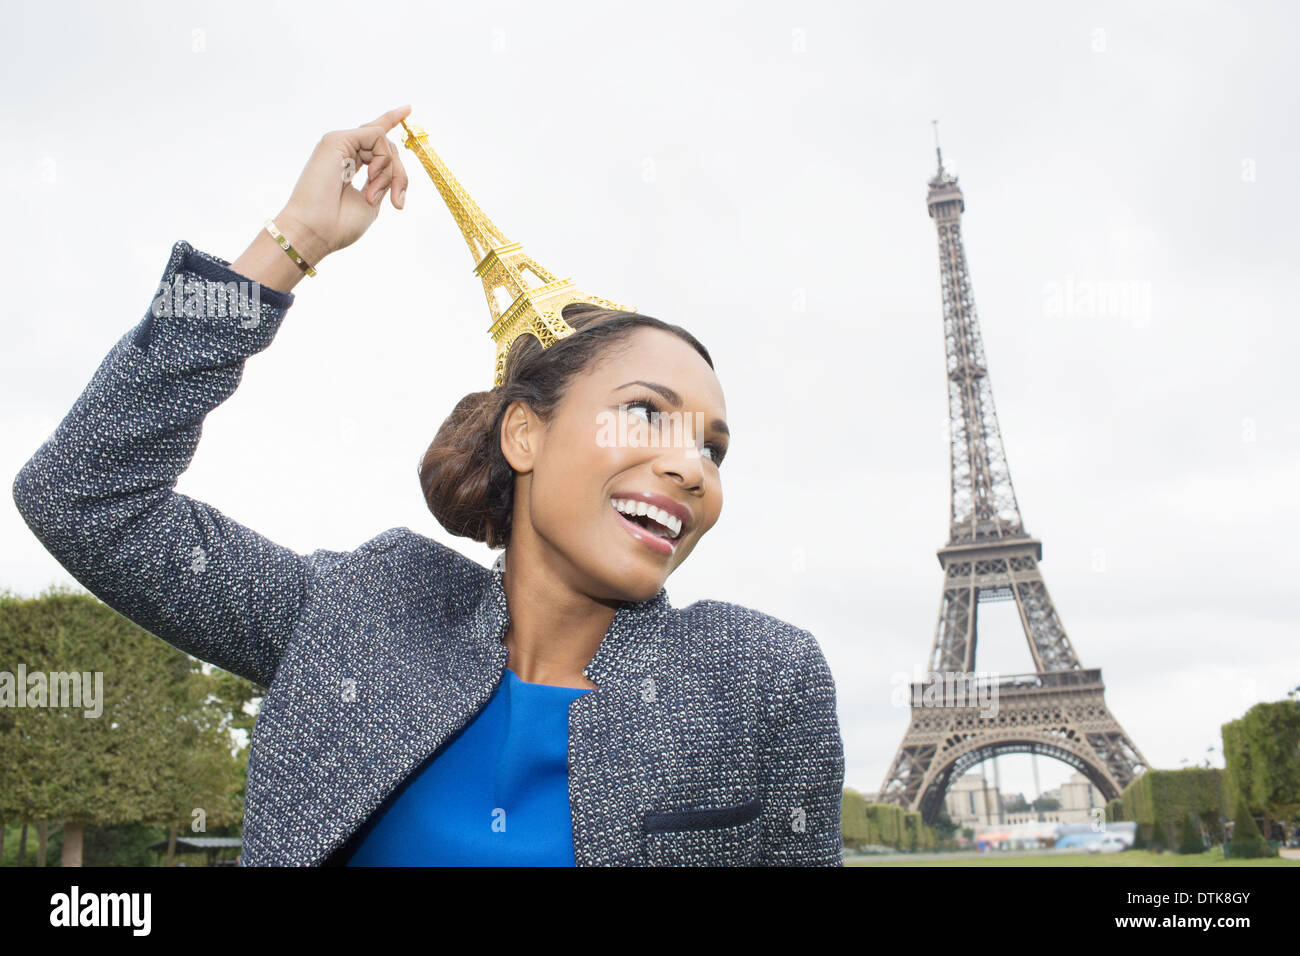 Woman posing with souvenir in front of Eiffel Tower, Paris, France Stock Photo